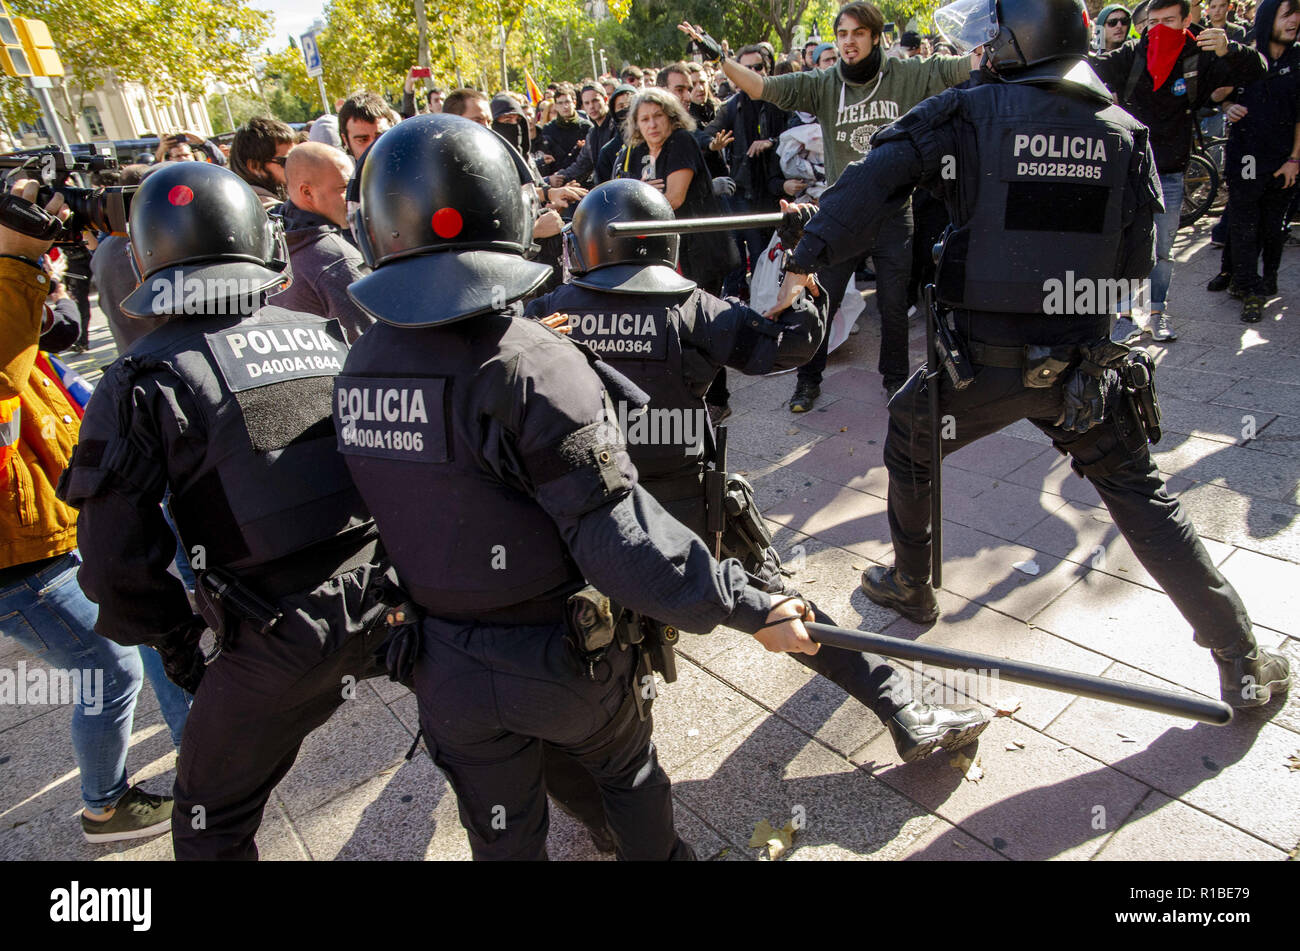 Barcelona, Catalonia, Spain. 10th Nov, 2018. The Mossos d'Esquadra, Catalan  police, are seen charging on the demonstrators.Some 500 people have  gathered to protest the demonstration of pride of the Spanish police in